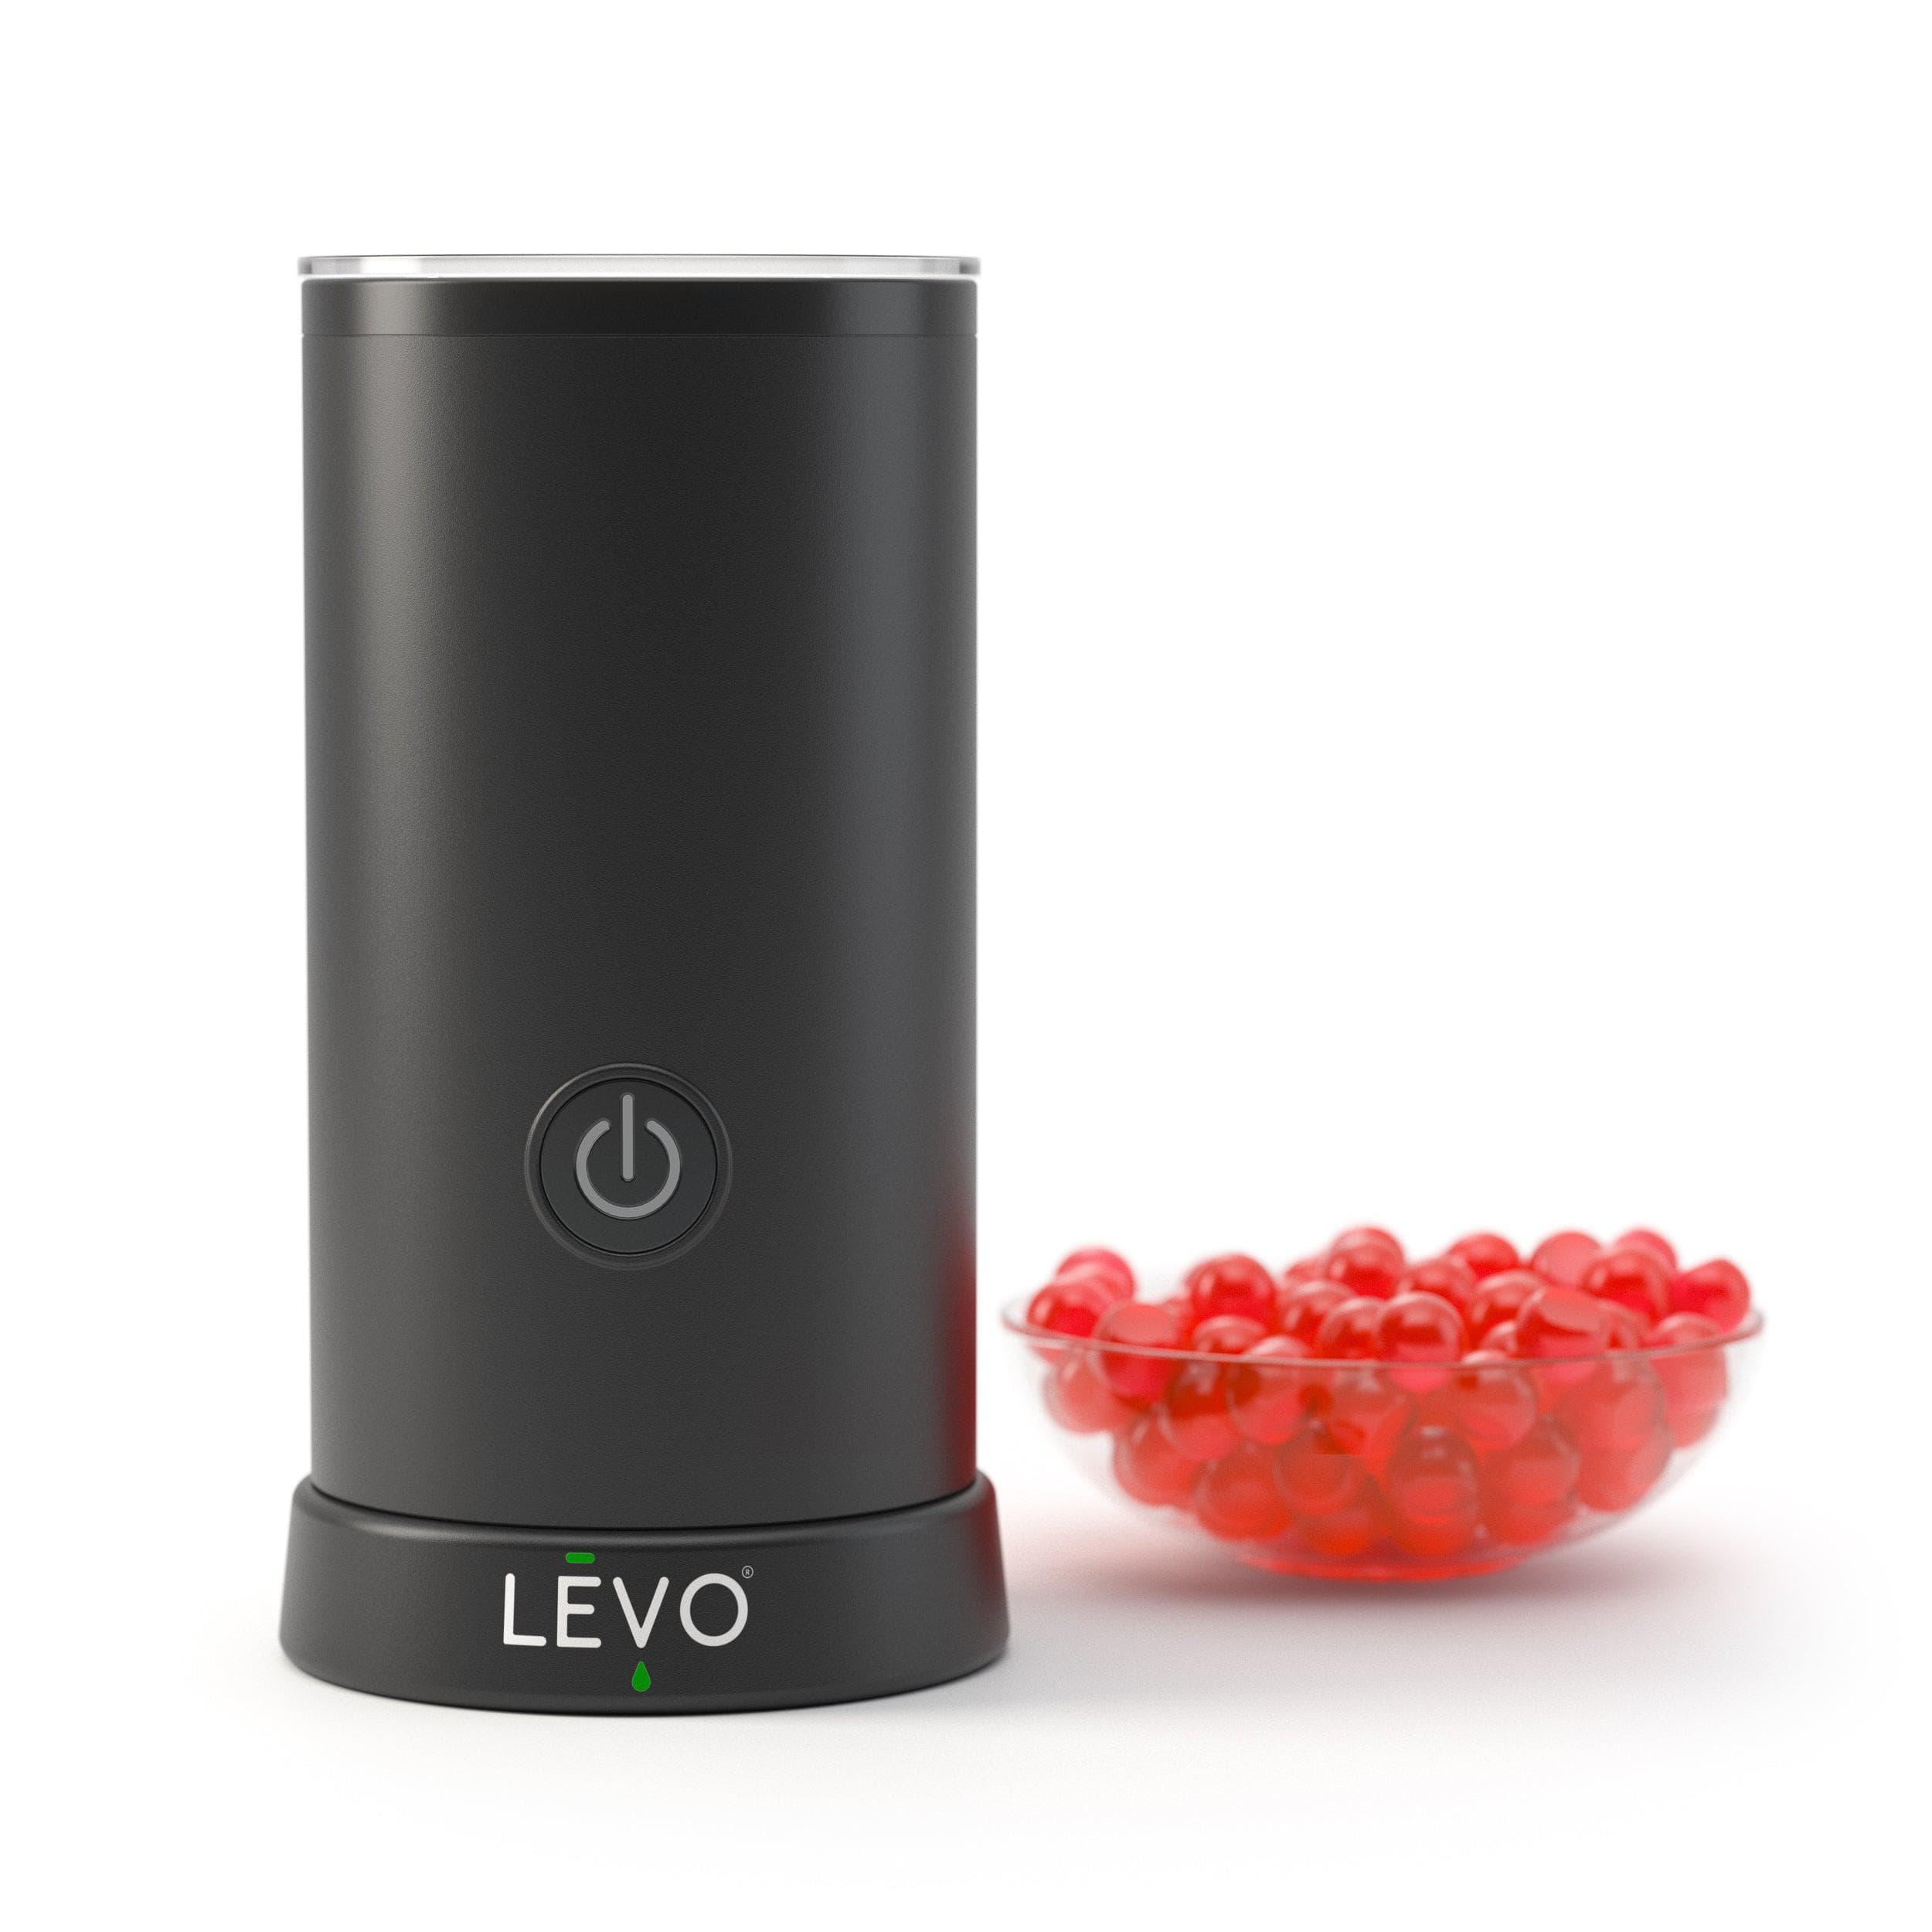 LĒVO Gummy Candy Mixer for Making Infused Edibles - LEVO Oil Infusion, Inc.